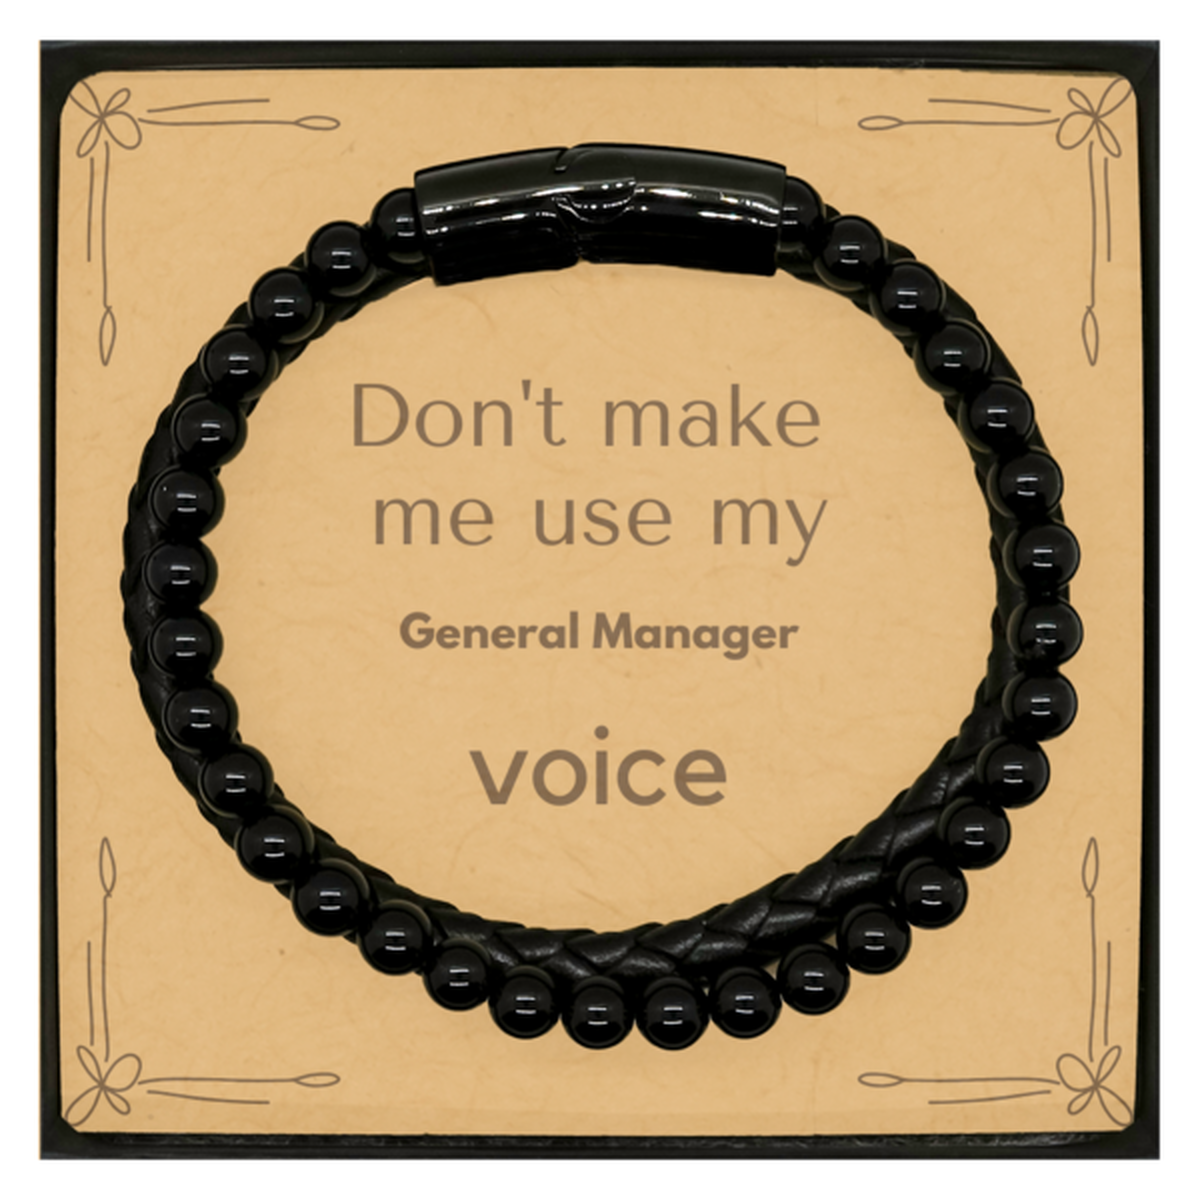 Don't make me use my General Manager voice, Sarcasm General Manager Card Gifts, Christmas General Manager Stone Leather Bracelets Birthday Unique Gifts For General Manager Coworkers, Men, Women, Colleague, Friends